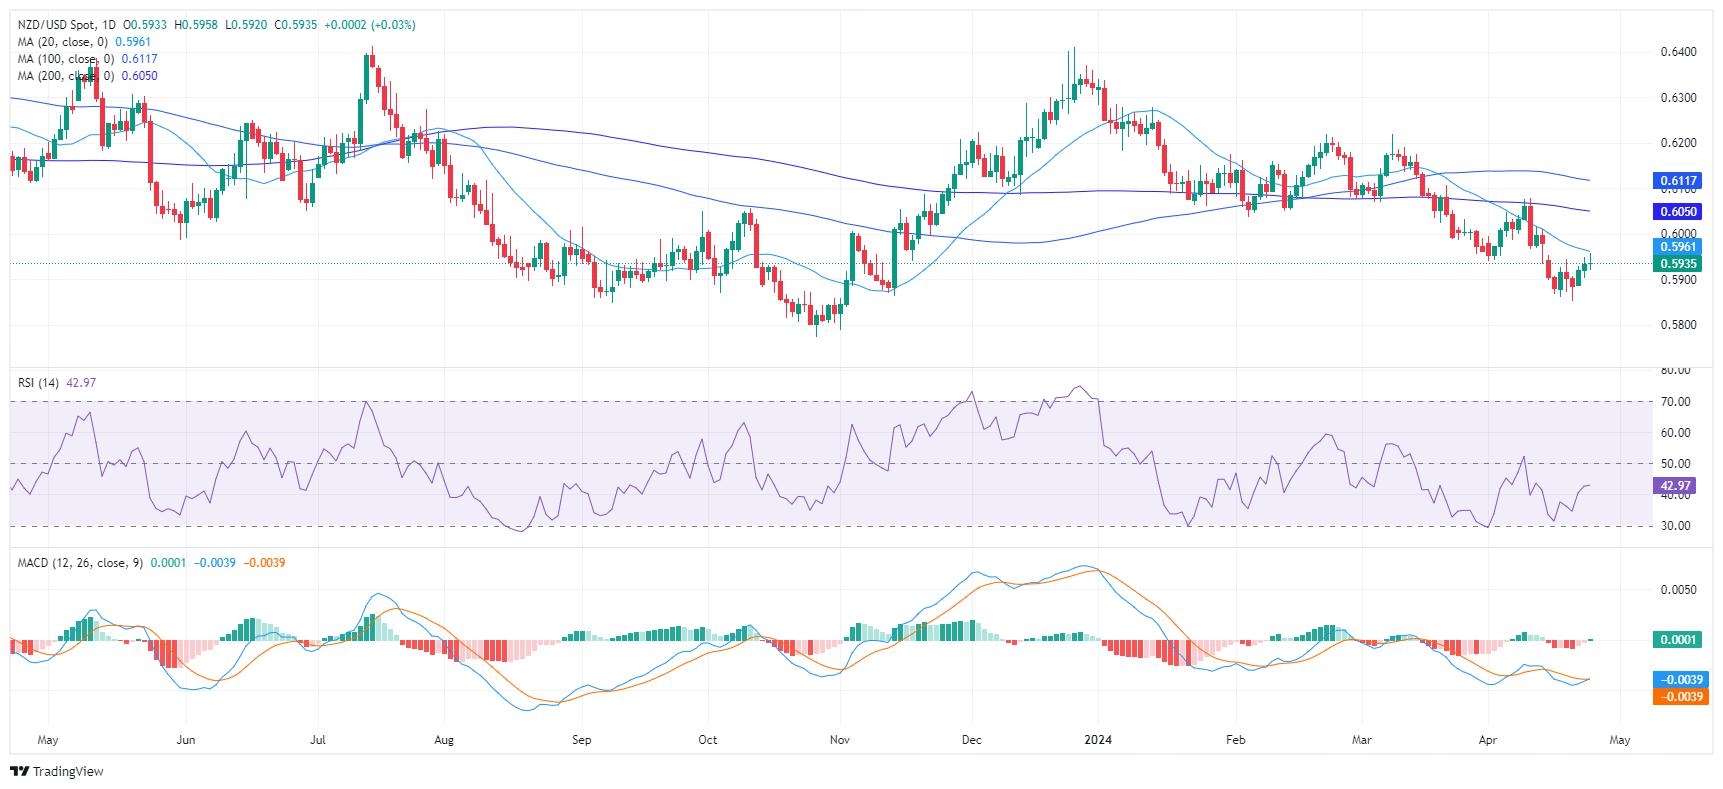 NZD/USD Price Analysis: Bearish forces persist, bulls challenged the 20-day SMA